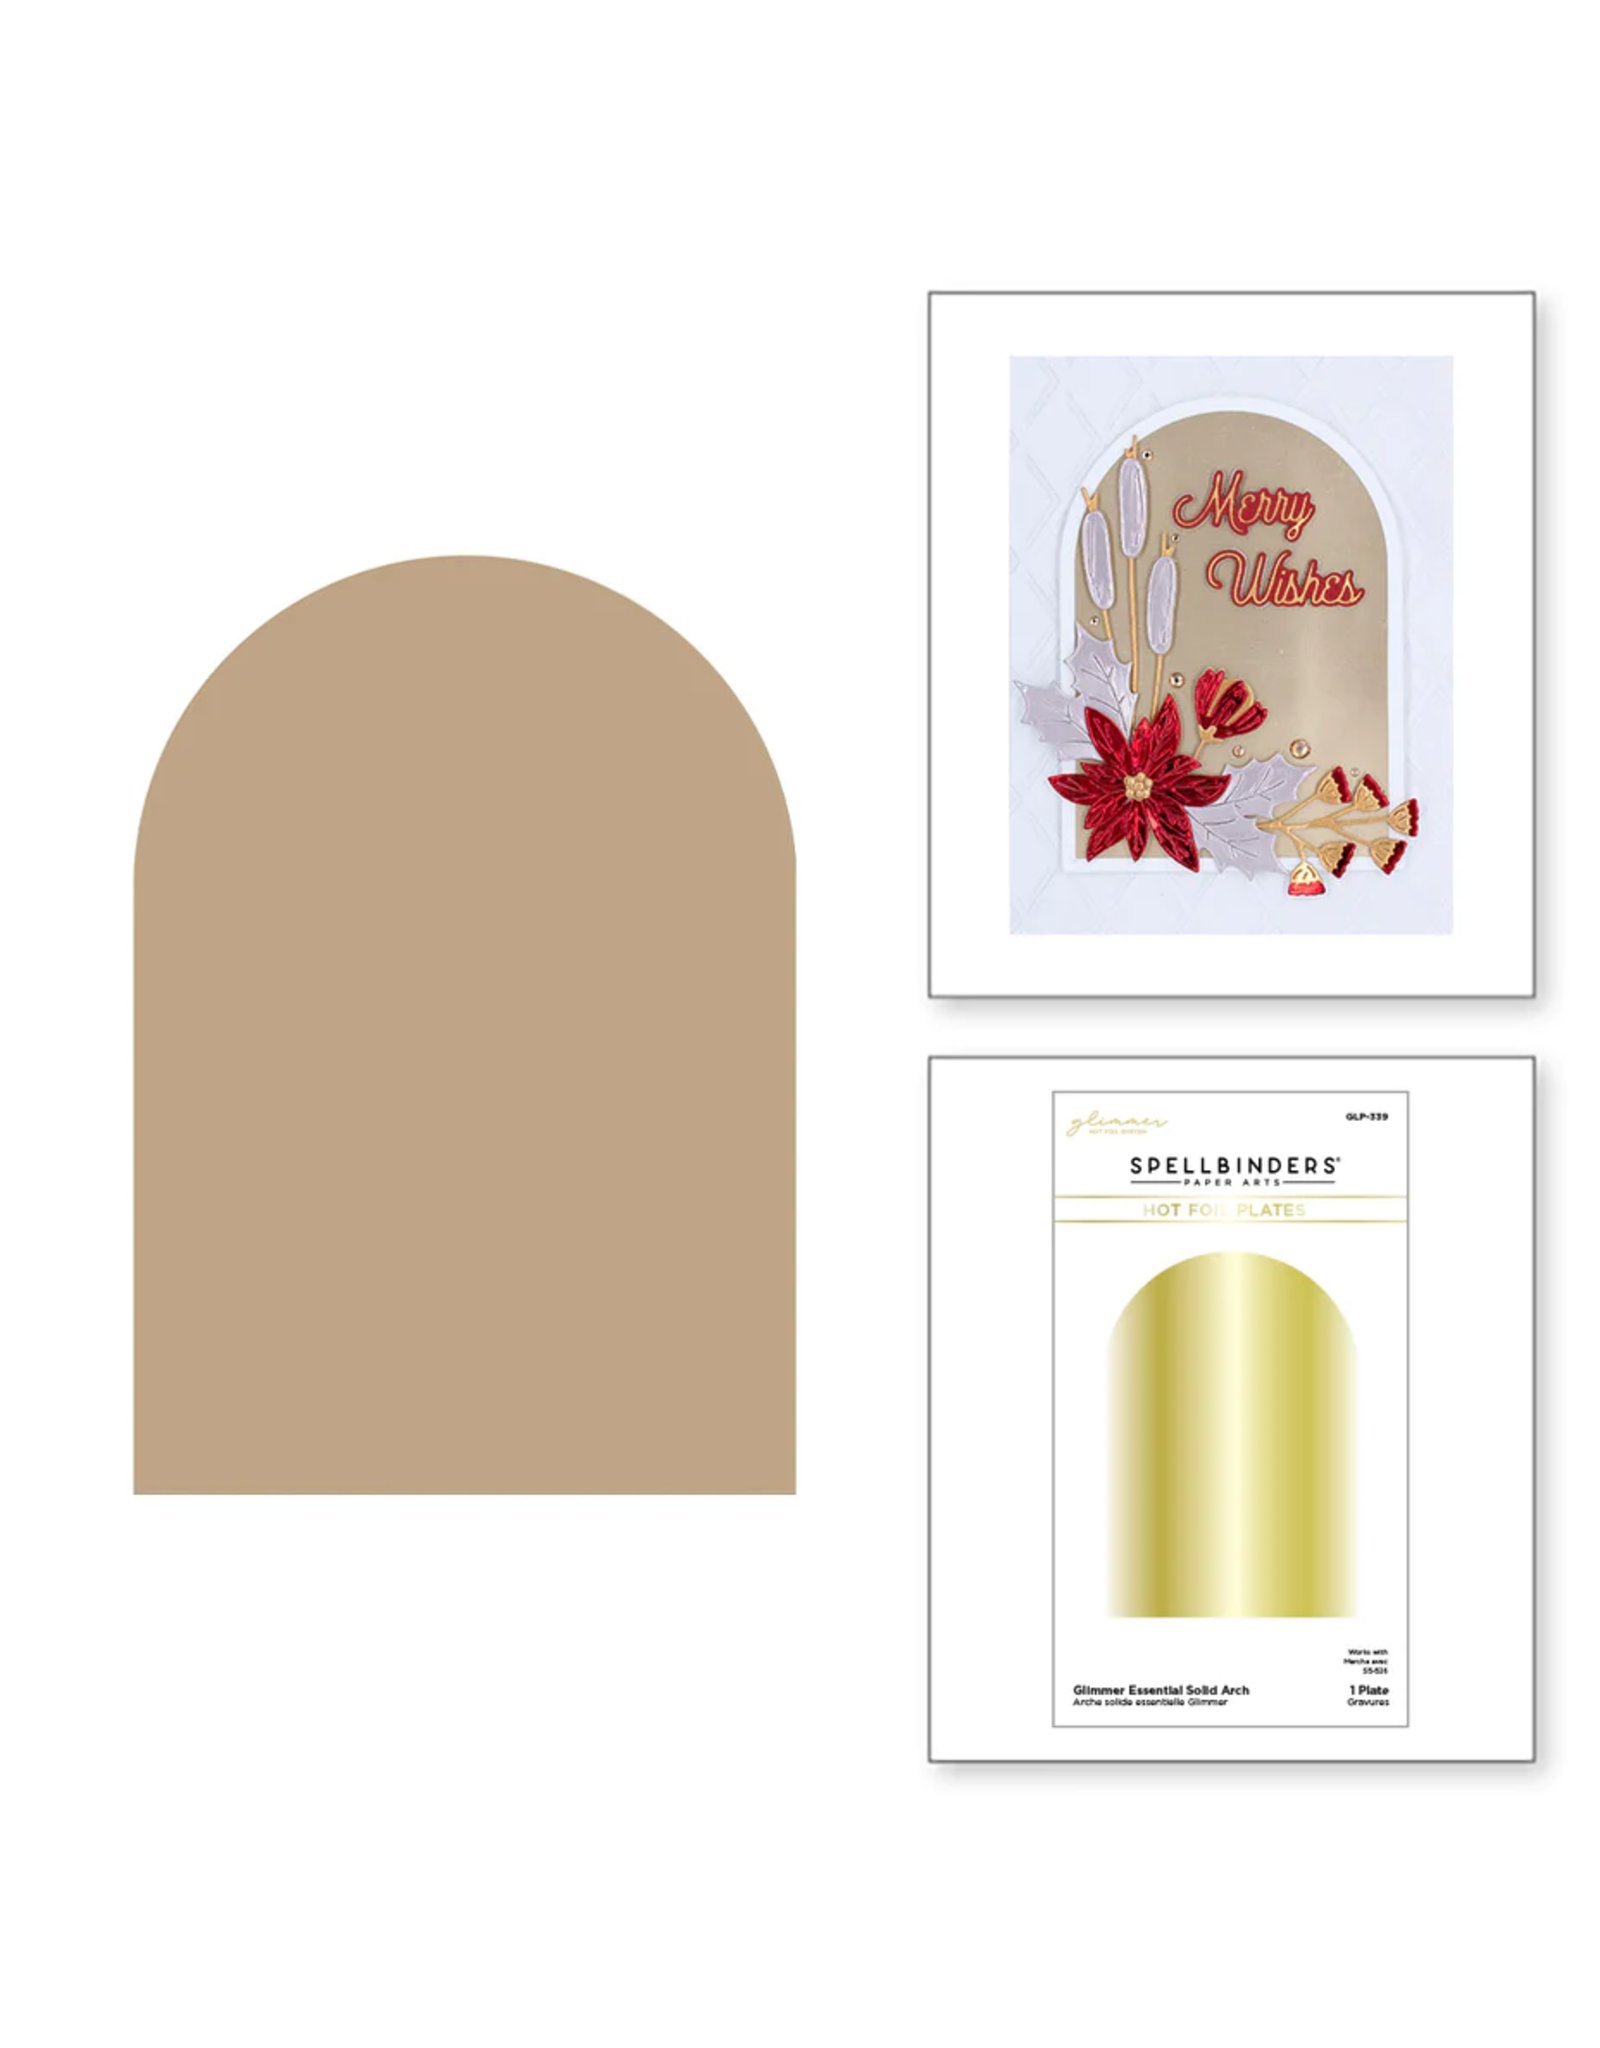 Spellbinders Glimmer Essential Solid Arch  - Glimmer Plate